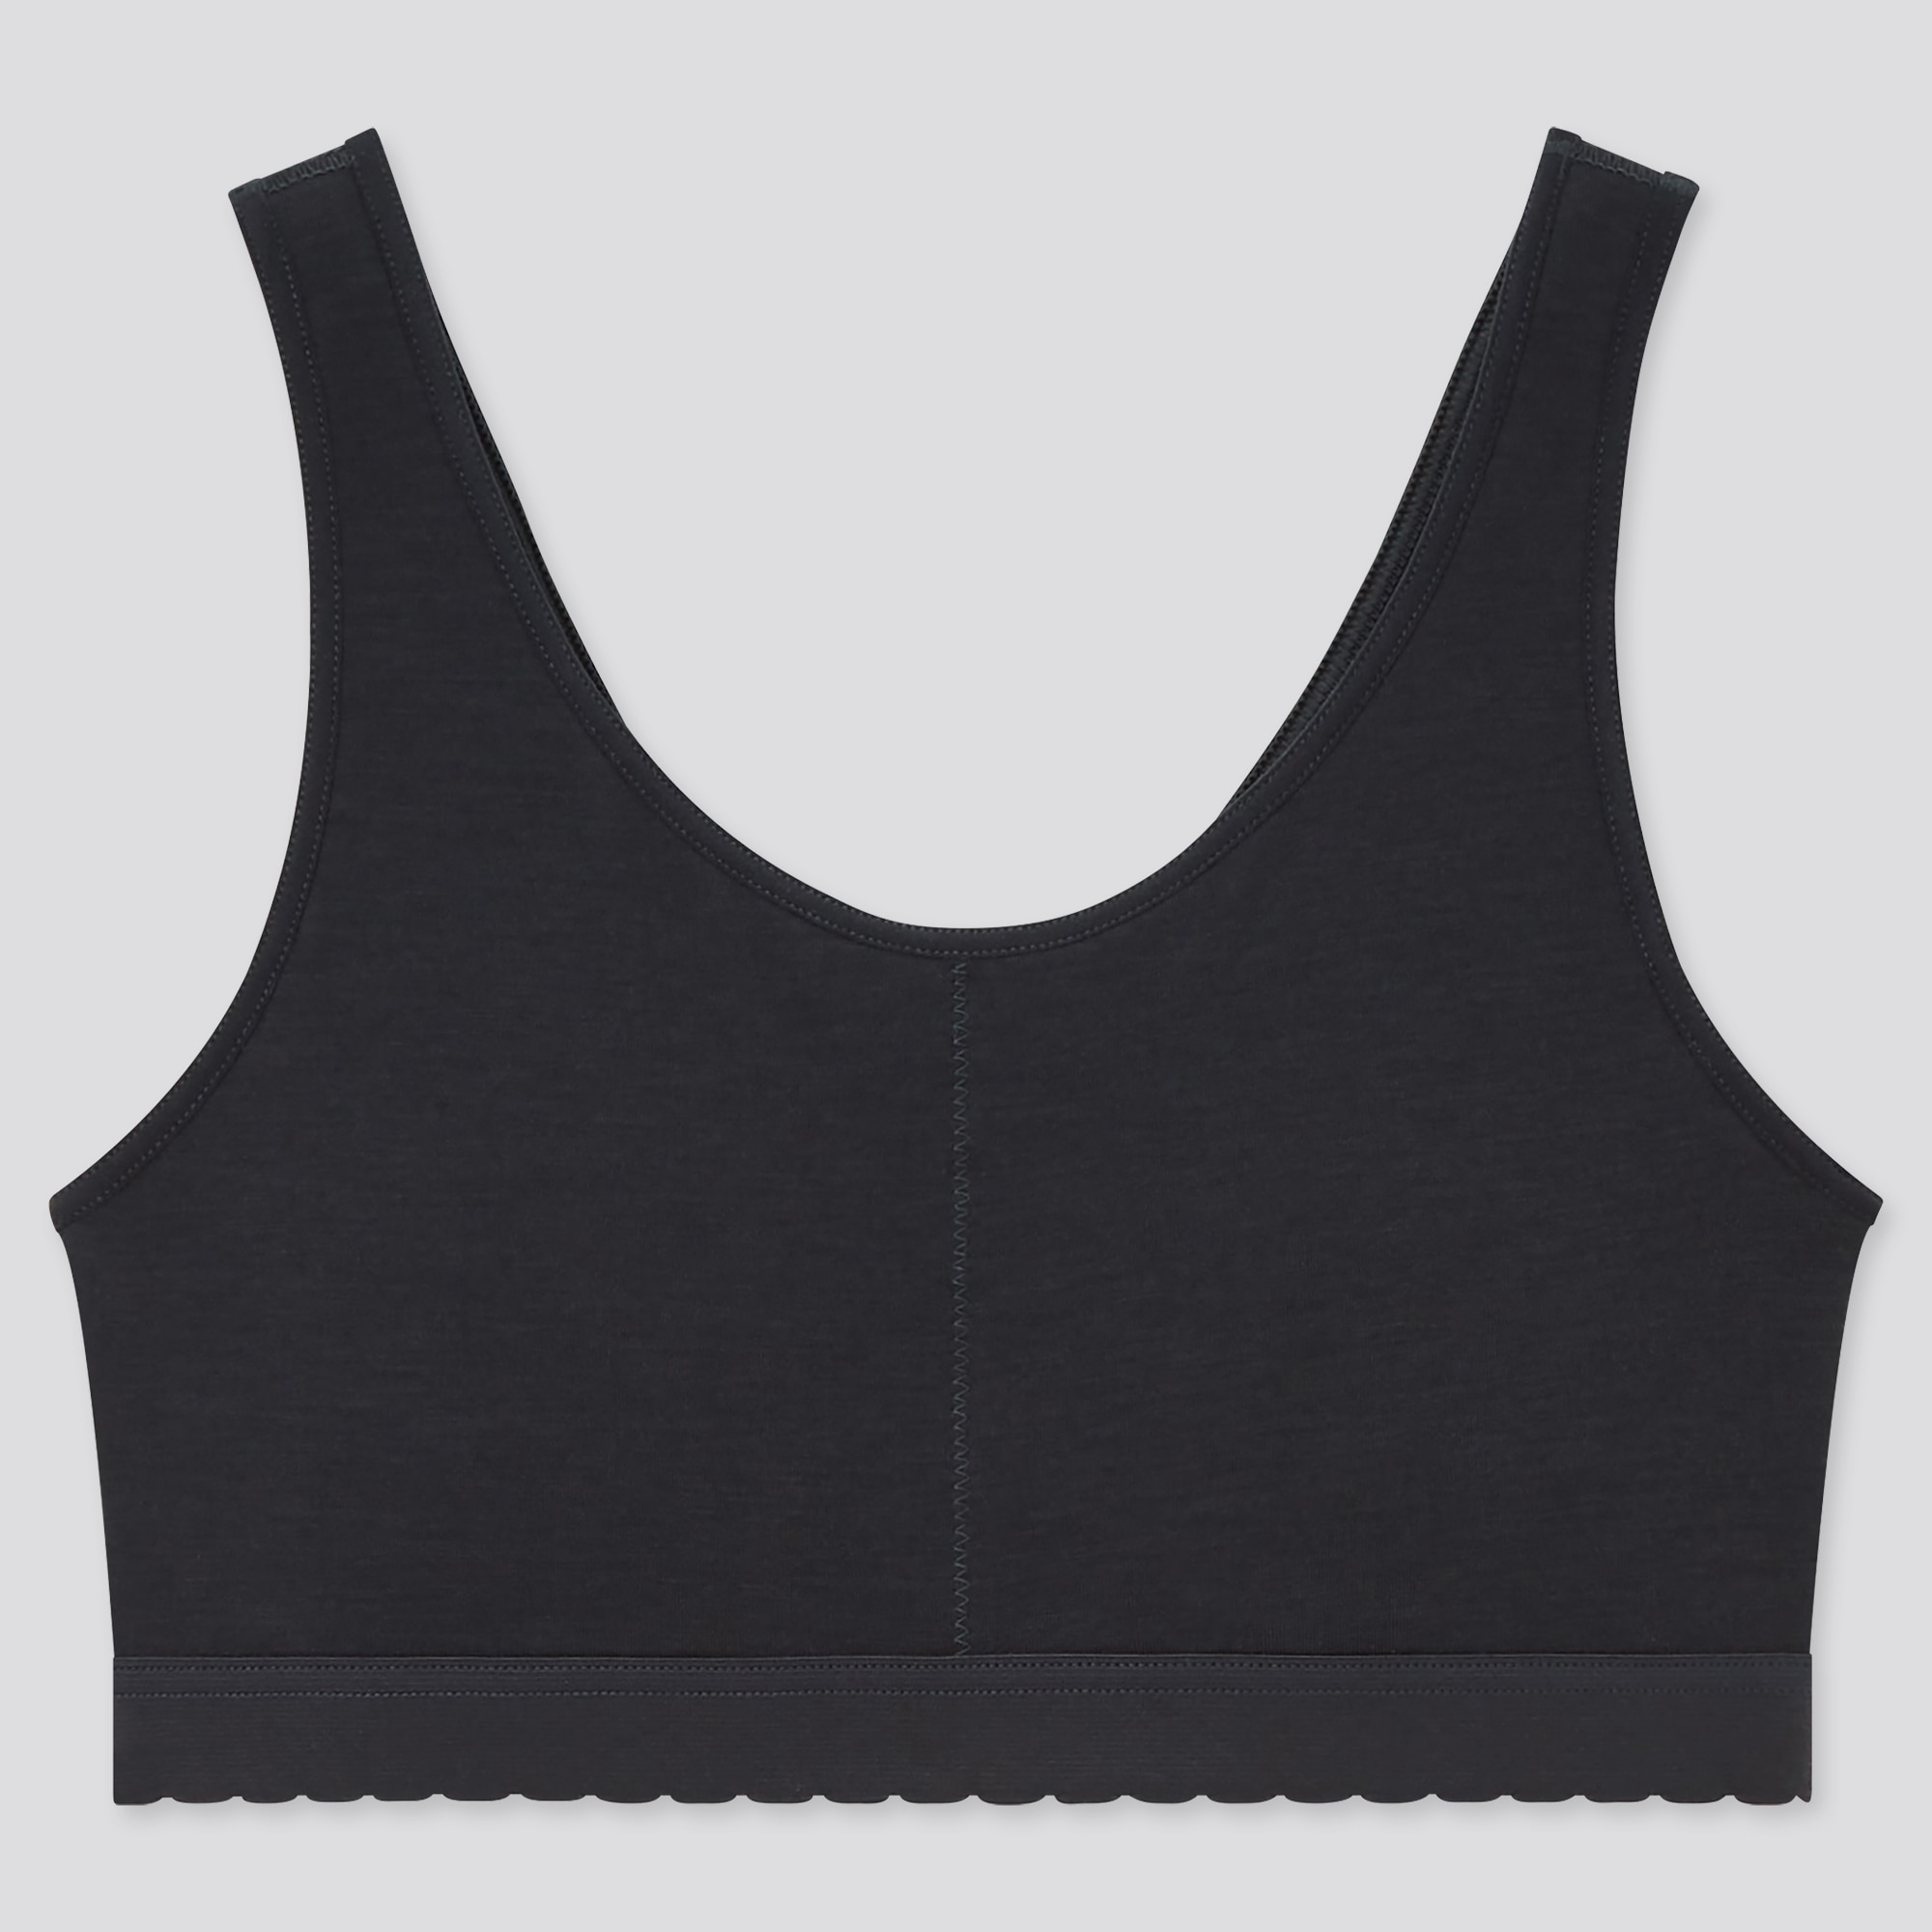 UNIQLO INDIA on X: Bratops AIRism Bra Camisole 432472 (Rs. 1990) AIRism  Bra Top : 445259 (Rs. 1990) AIRism Cotton Ribbed Bra Top: 445261 (Rs.1990)  American Sleeve Cropped Bra Top : 447313 (